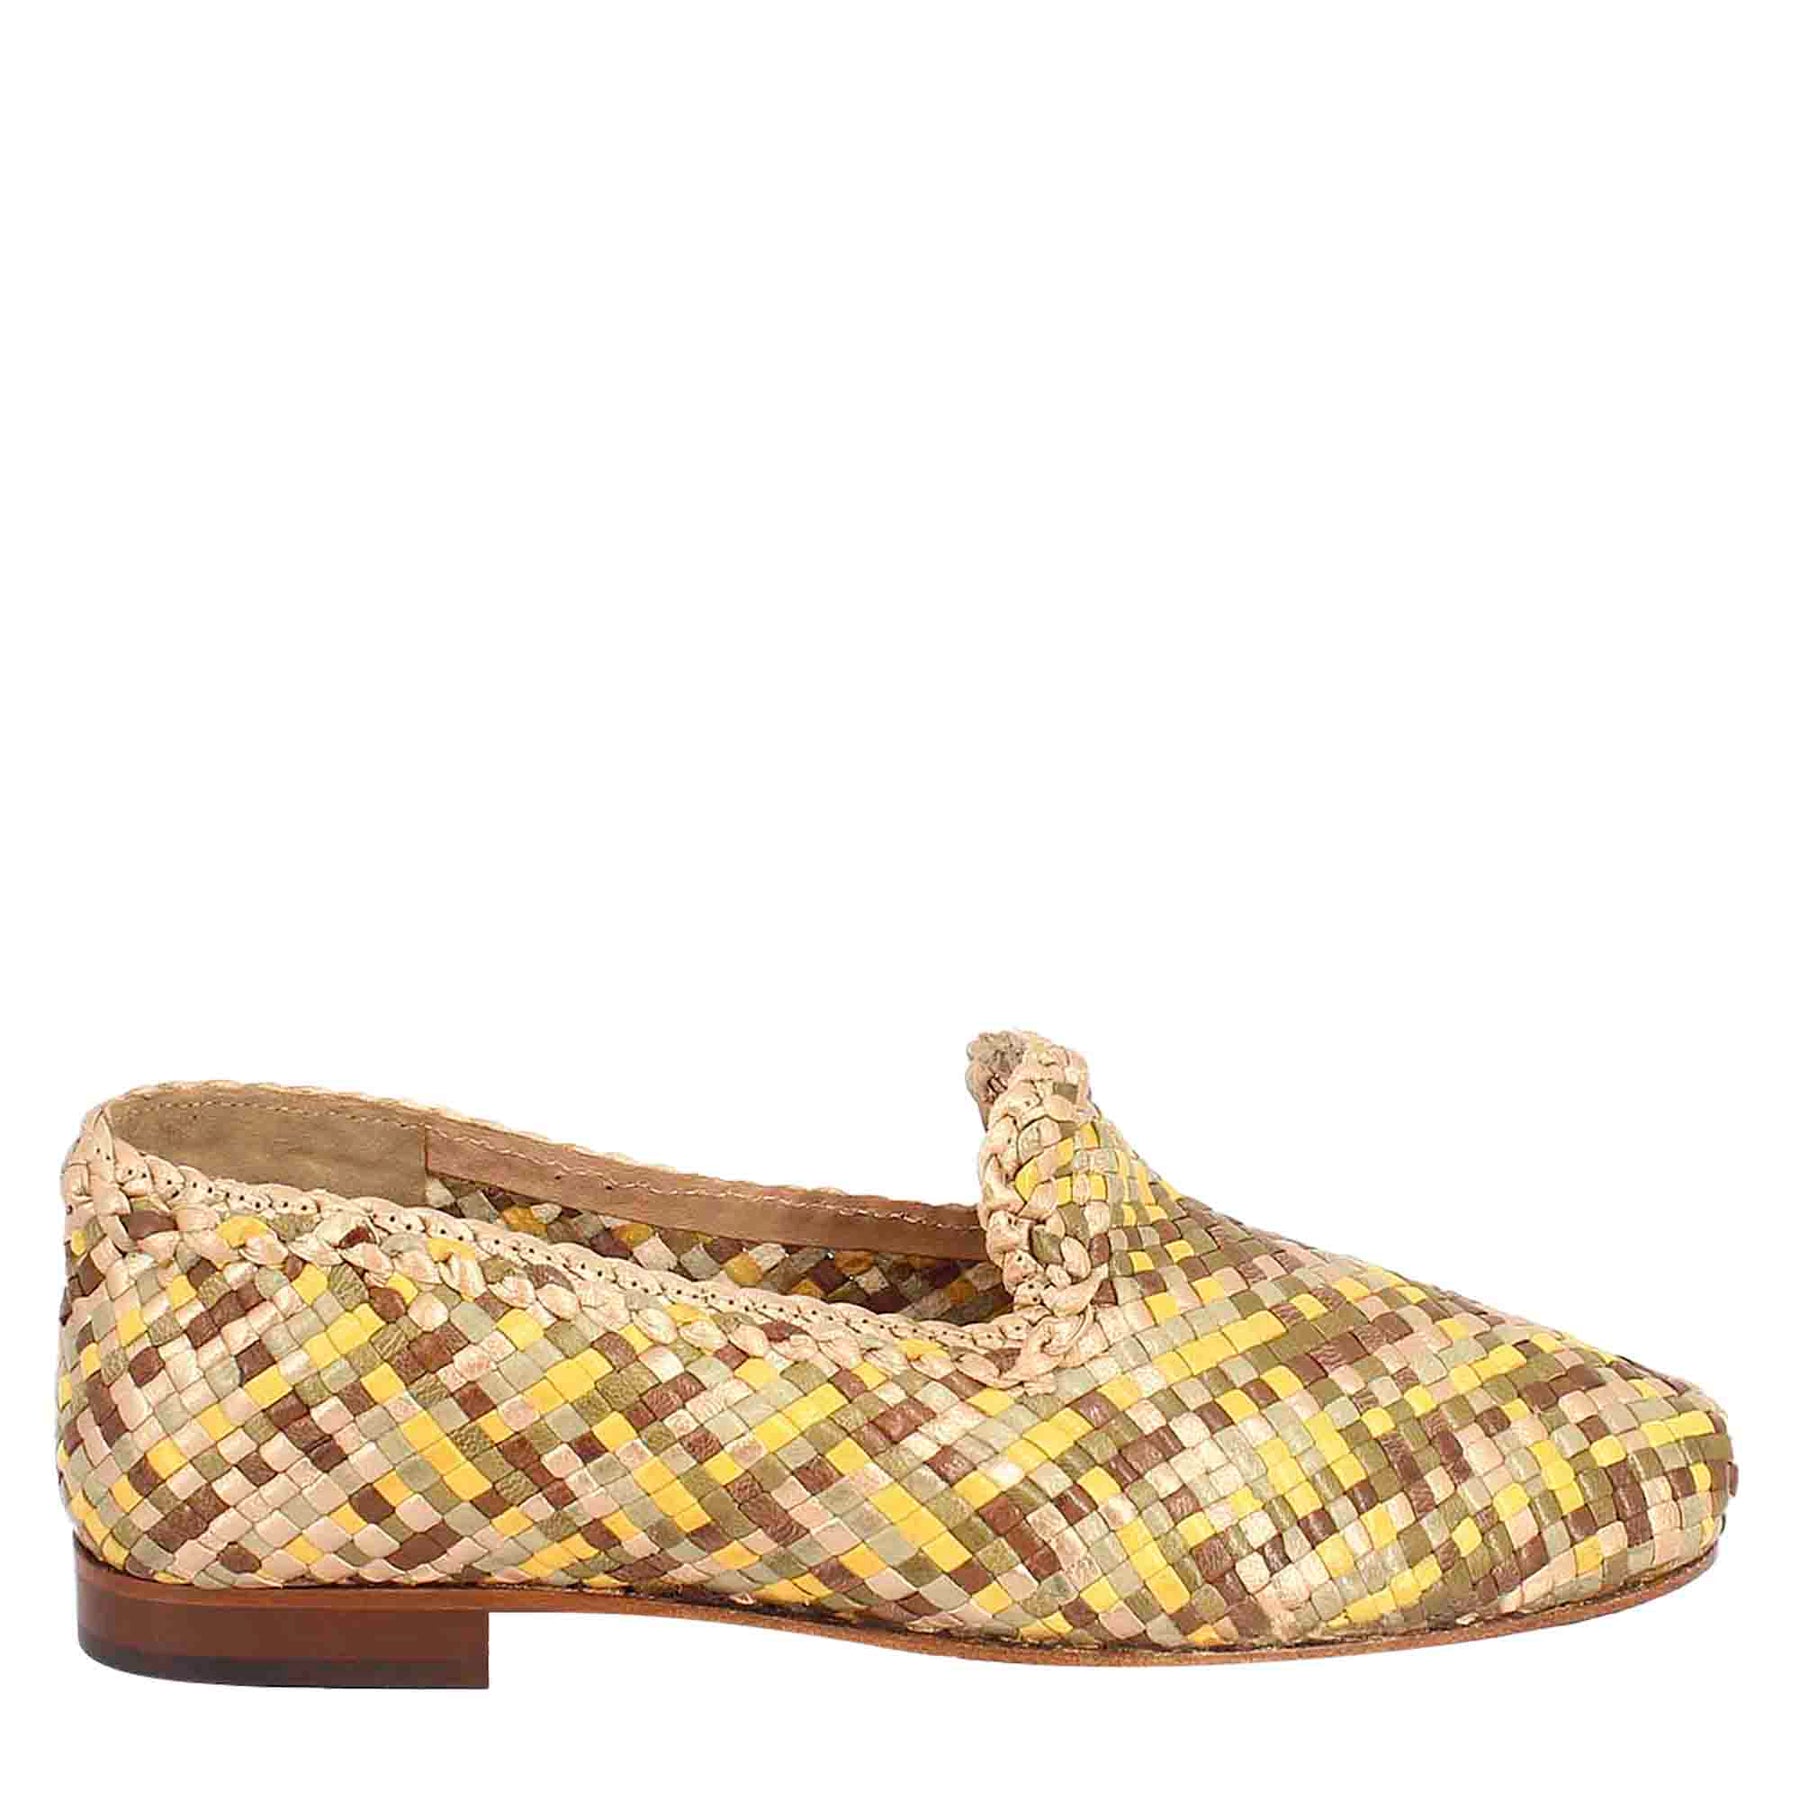 Handmade women's moccasins in yellow, green and brown braided leather